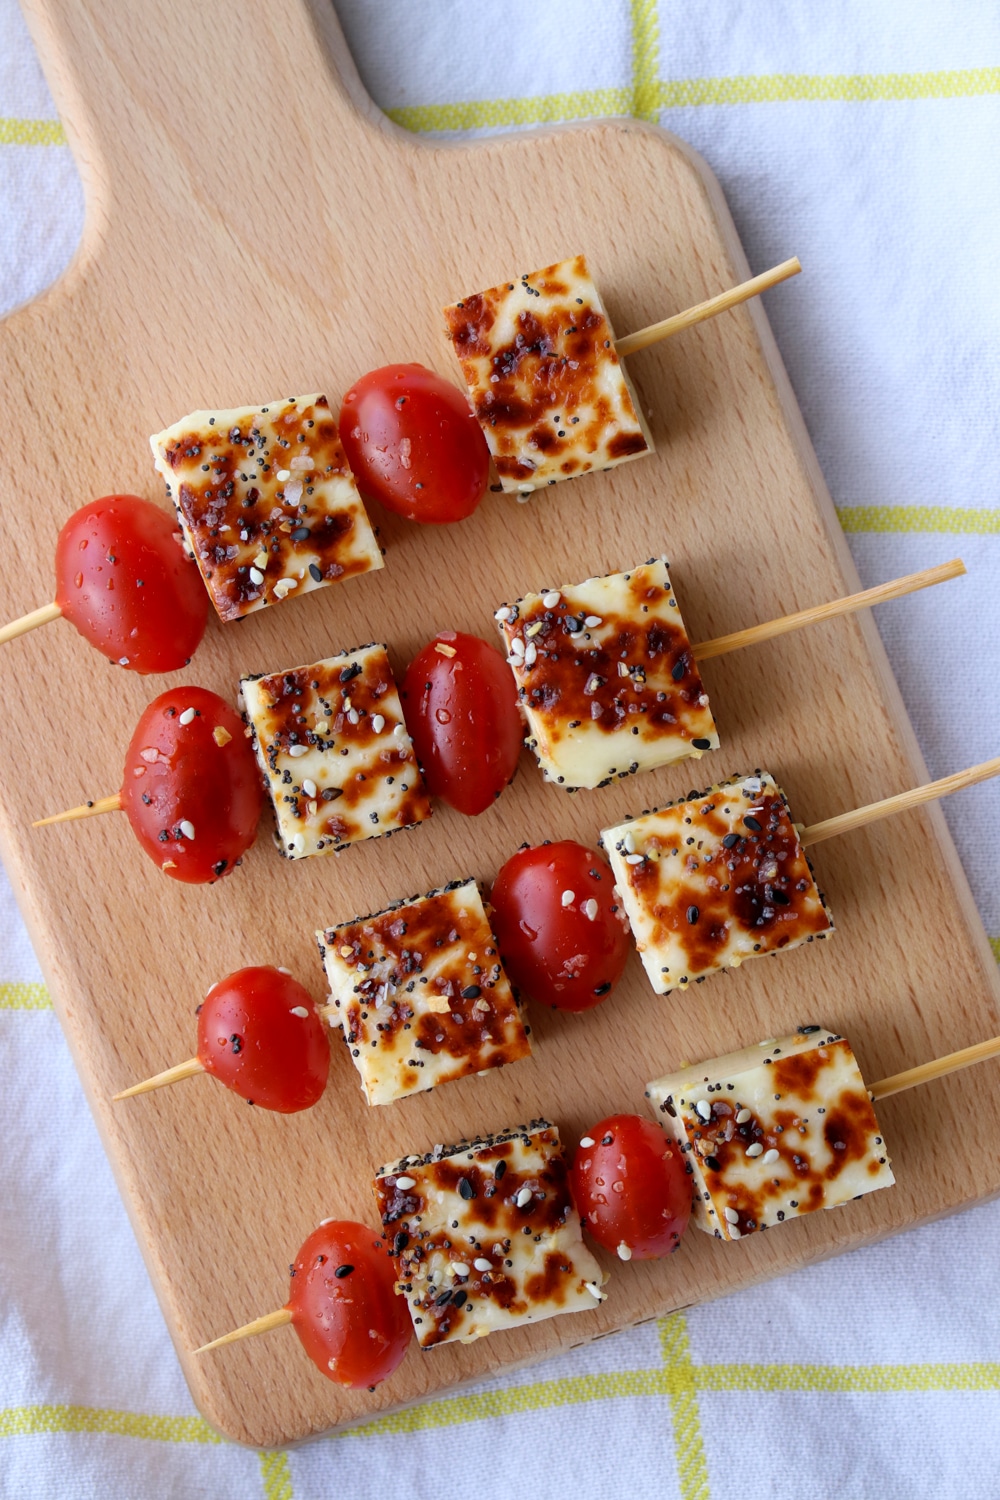 small board with 4 skewers of cherry tomatoes and cheese cubes.